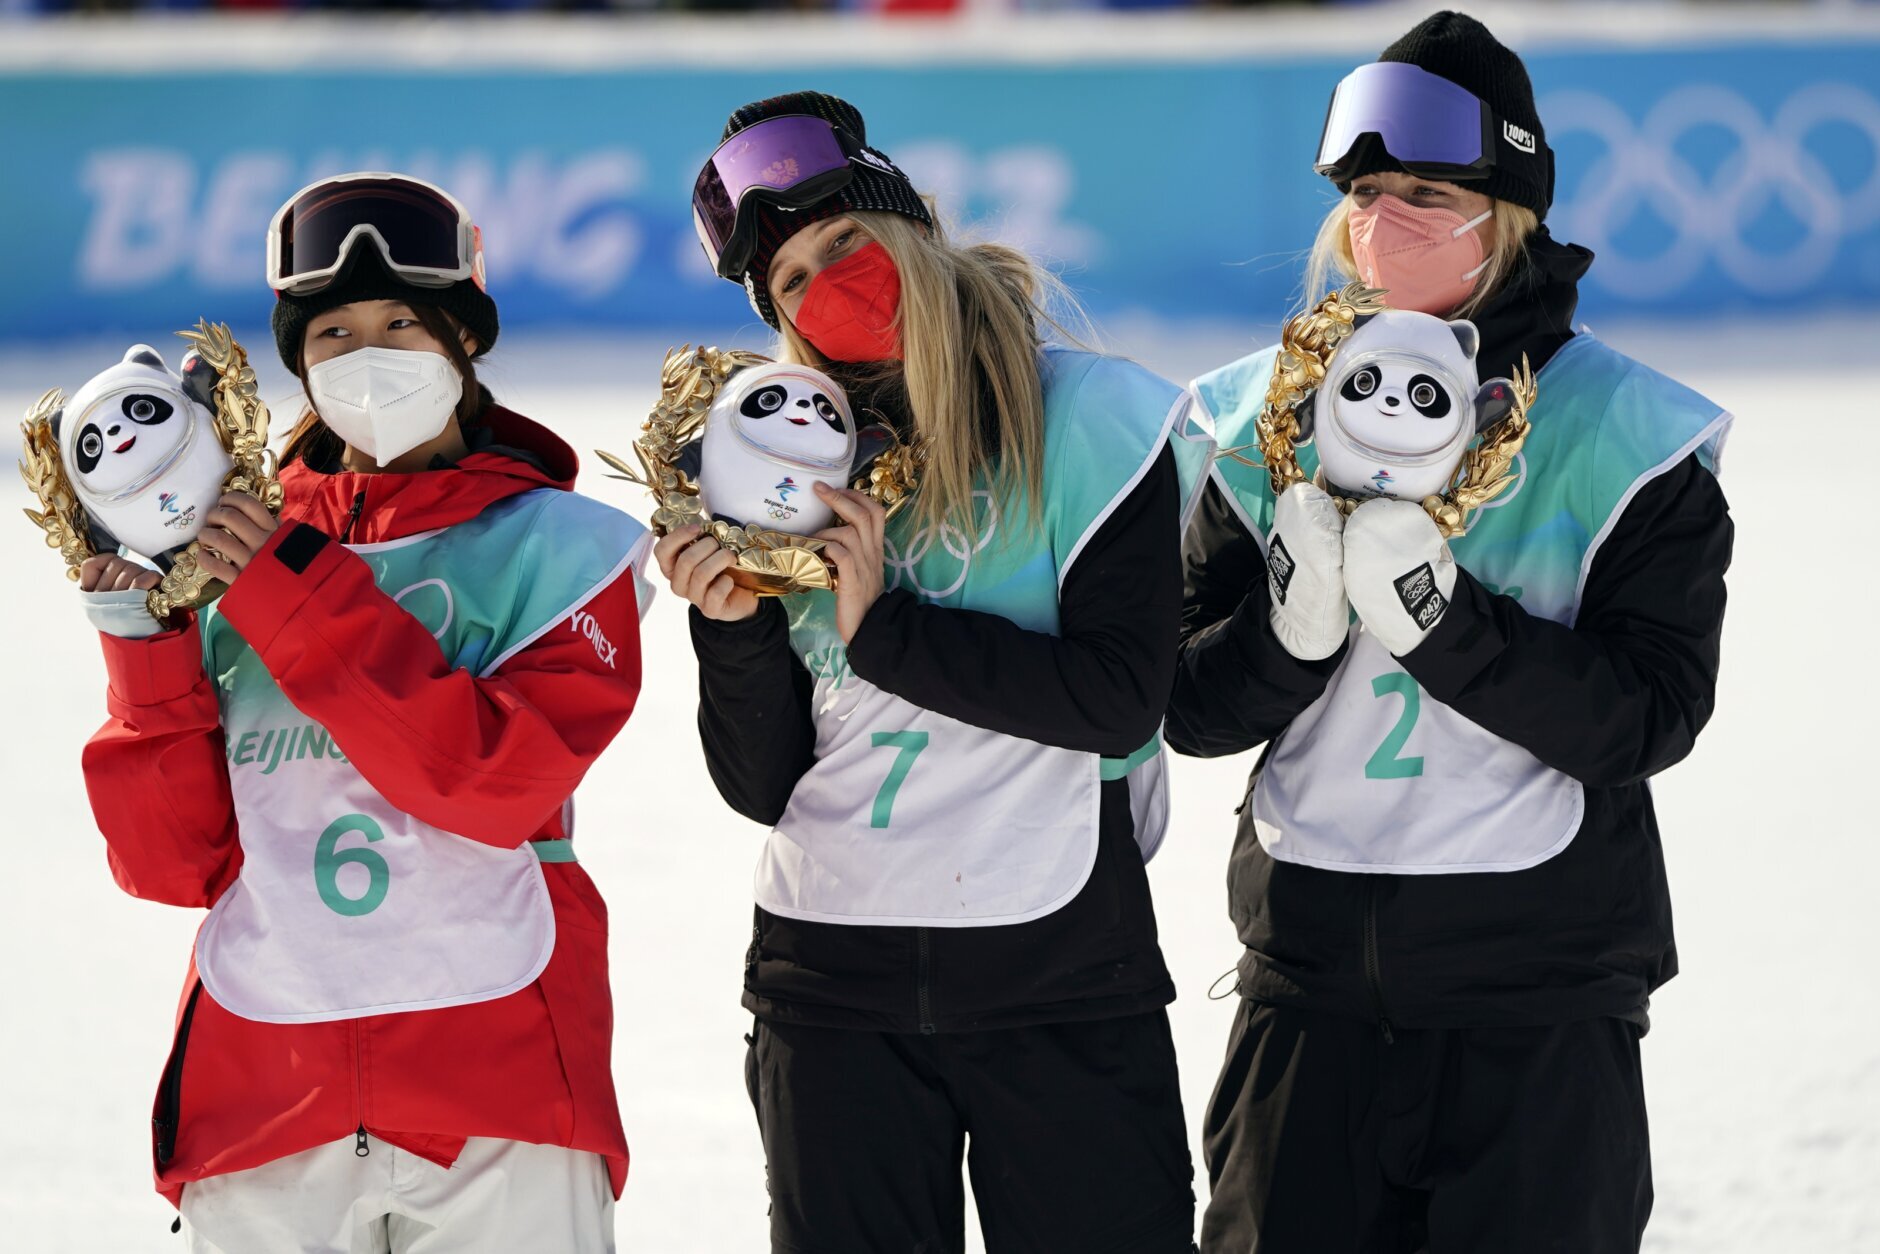 <p>Bronze medalist, from left, Kokomo Murase of Japan, gold medalist Anna Gasser of Austria, and silver medalist Zoi Sadowski Synnott of New Zealand, pose during a venue ceremony for the women&#8217;s snowboard big air finals of the 2022 Winter Olympics, Tuesday, Feb. 15, 2022, in Beijing.</p>
